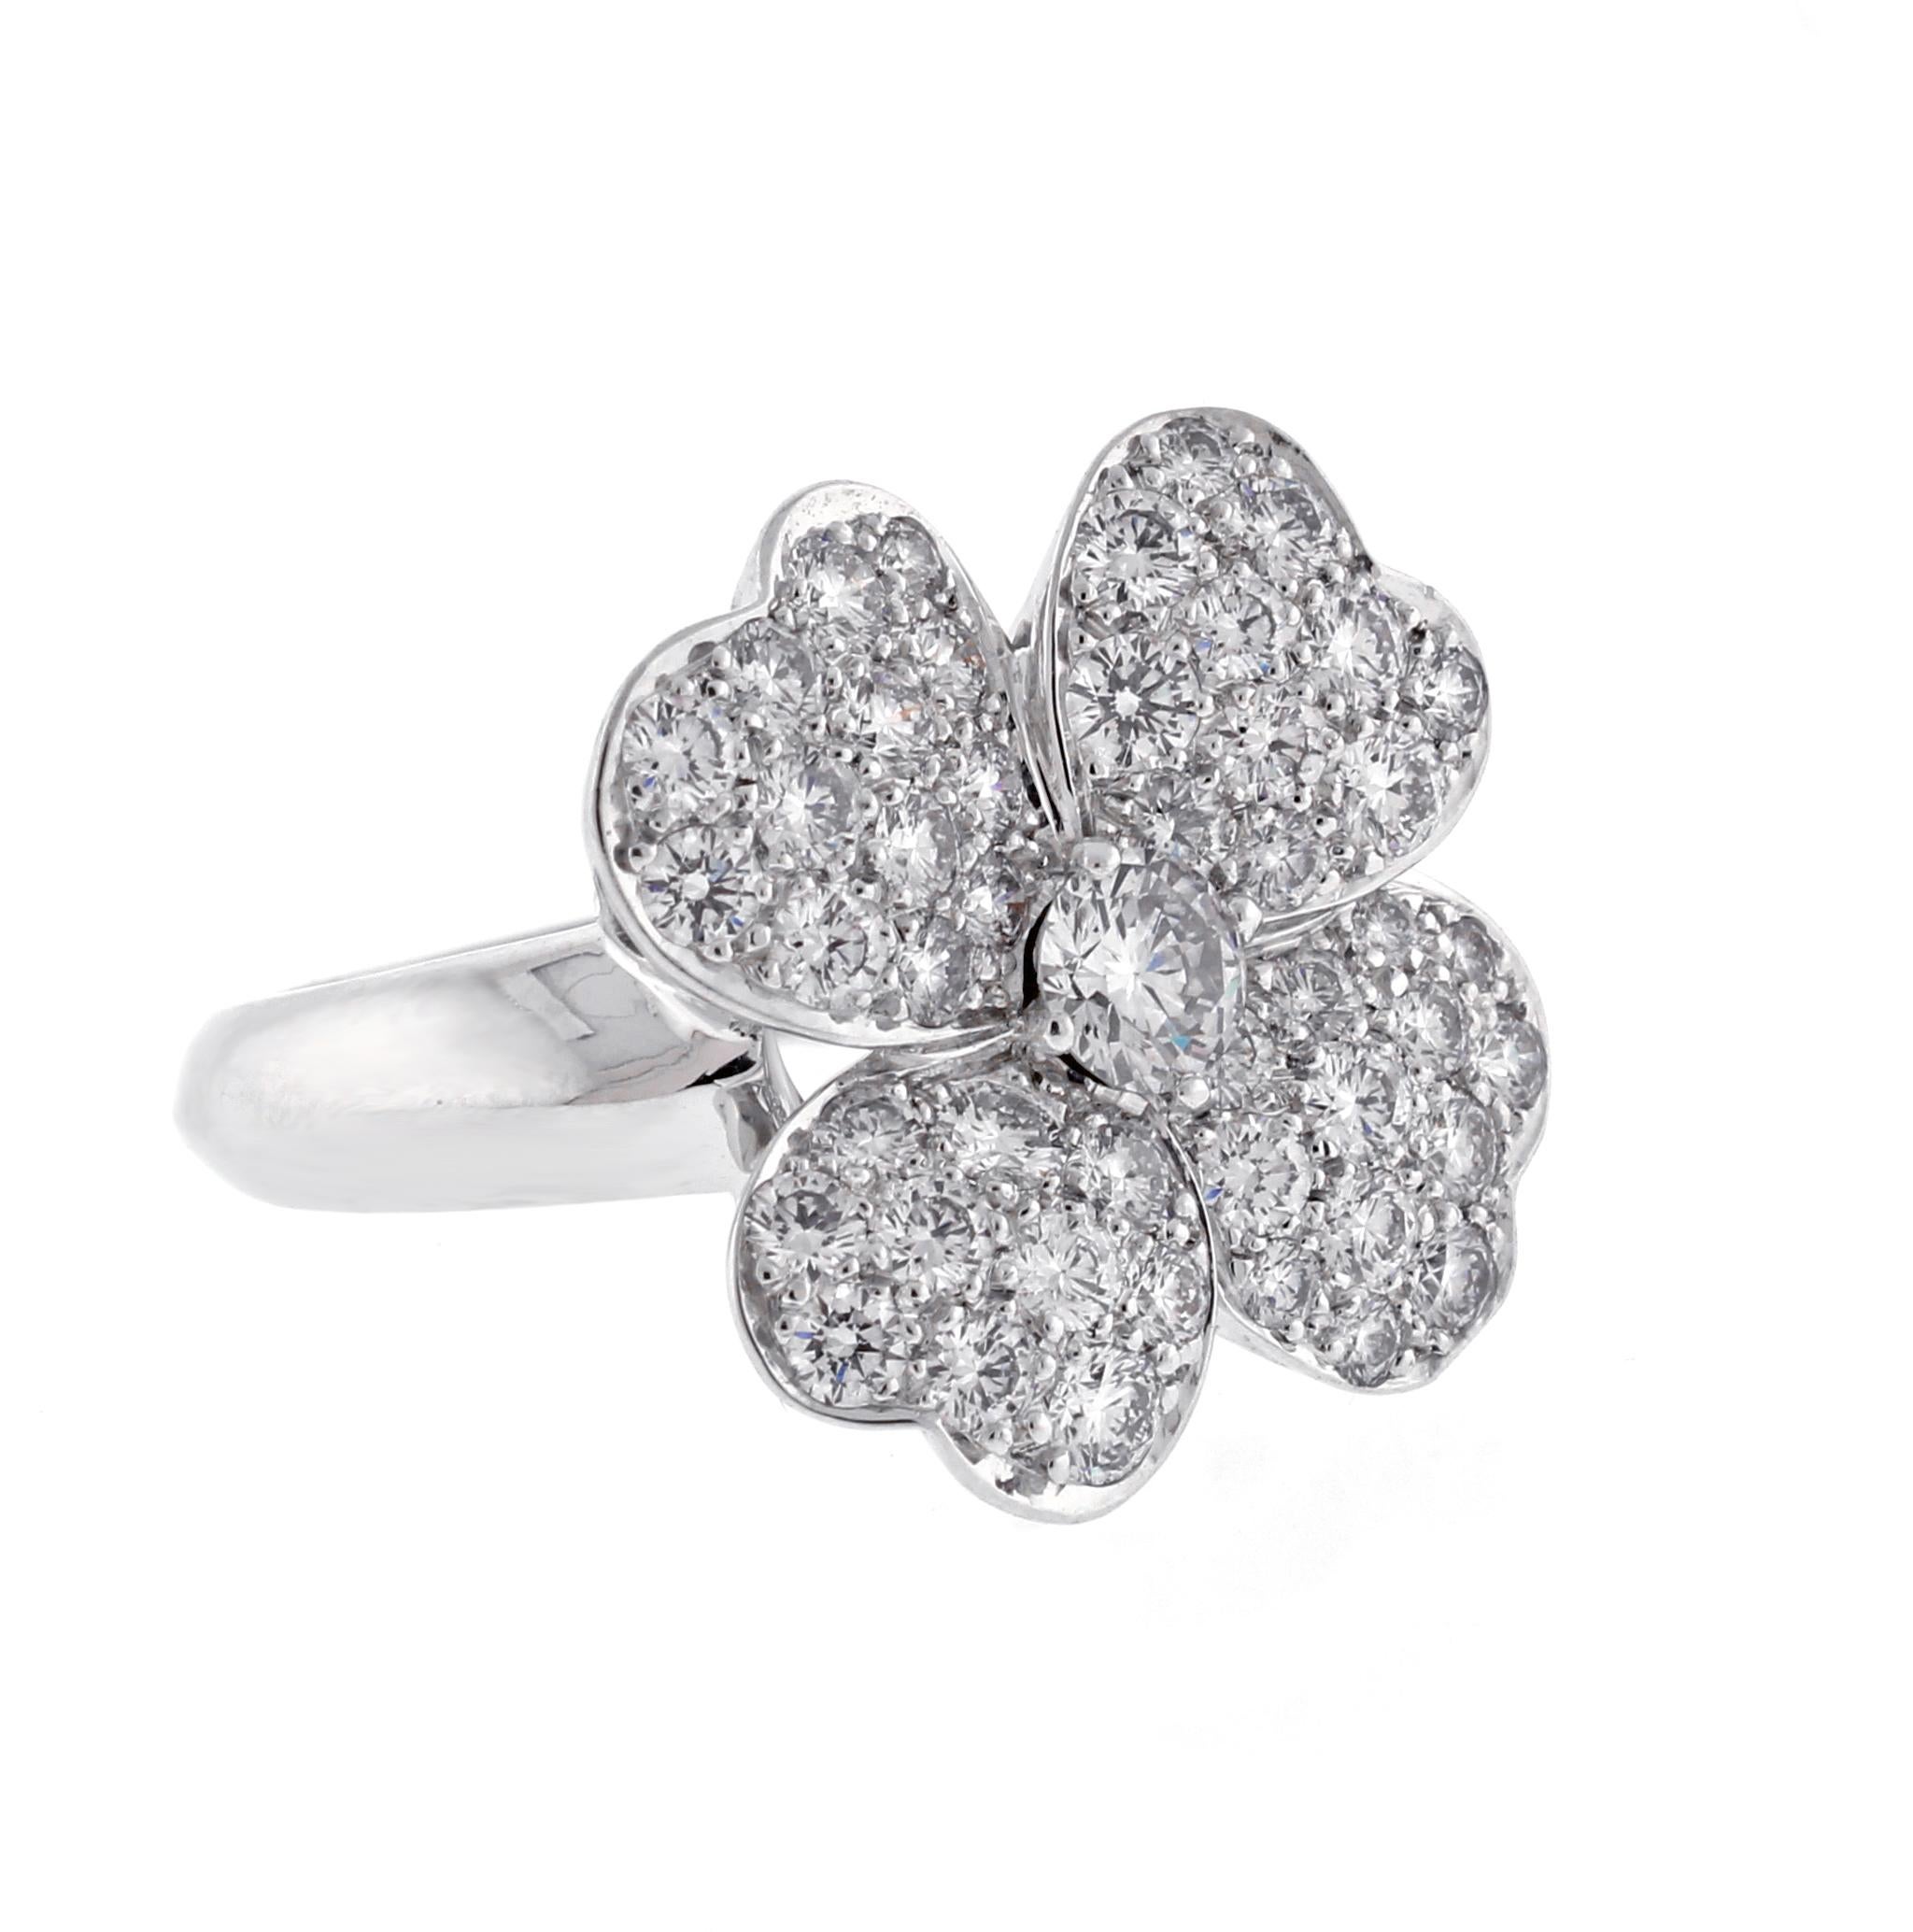 From Van Cleef & Arpels, Cosmos collection thier medium model diamond ring in 18kt white gold.
• Designer: Van Cleef & Arpels
• Metal: 18 karat white gold
• Circa:  2018
• Size: 4 3/4, can be resized
• Diamond: Center diamond .29cts, total diamond